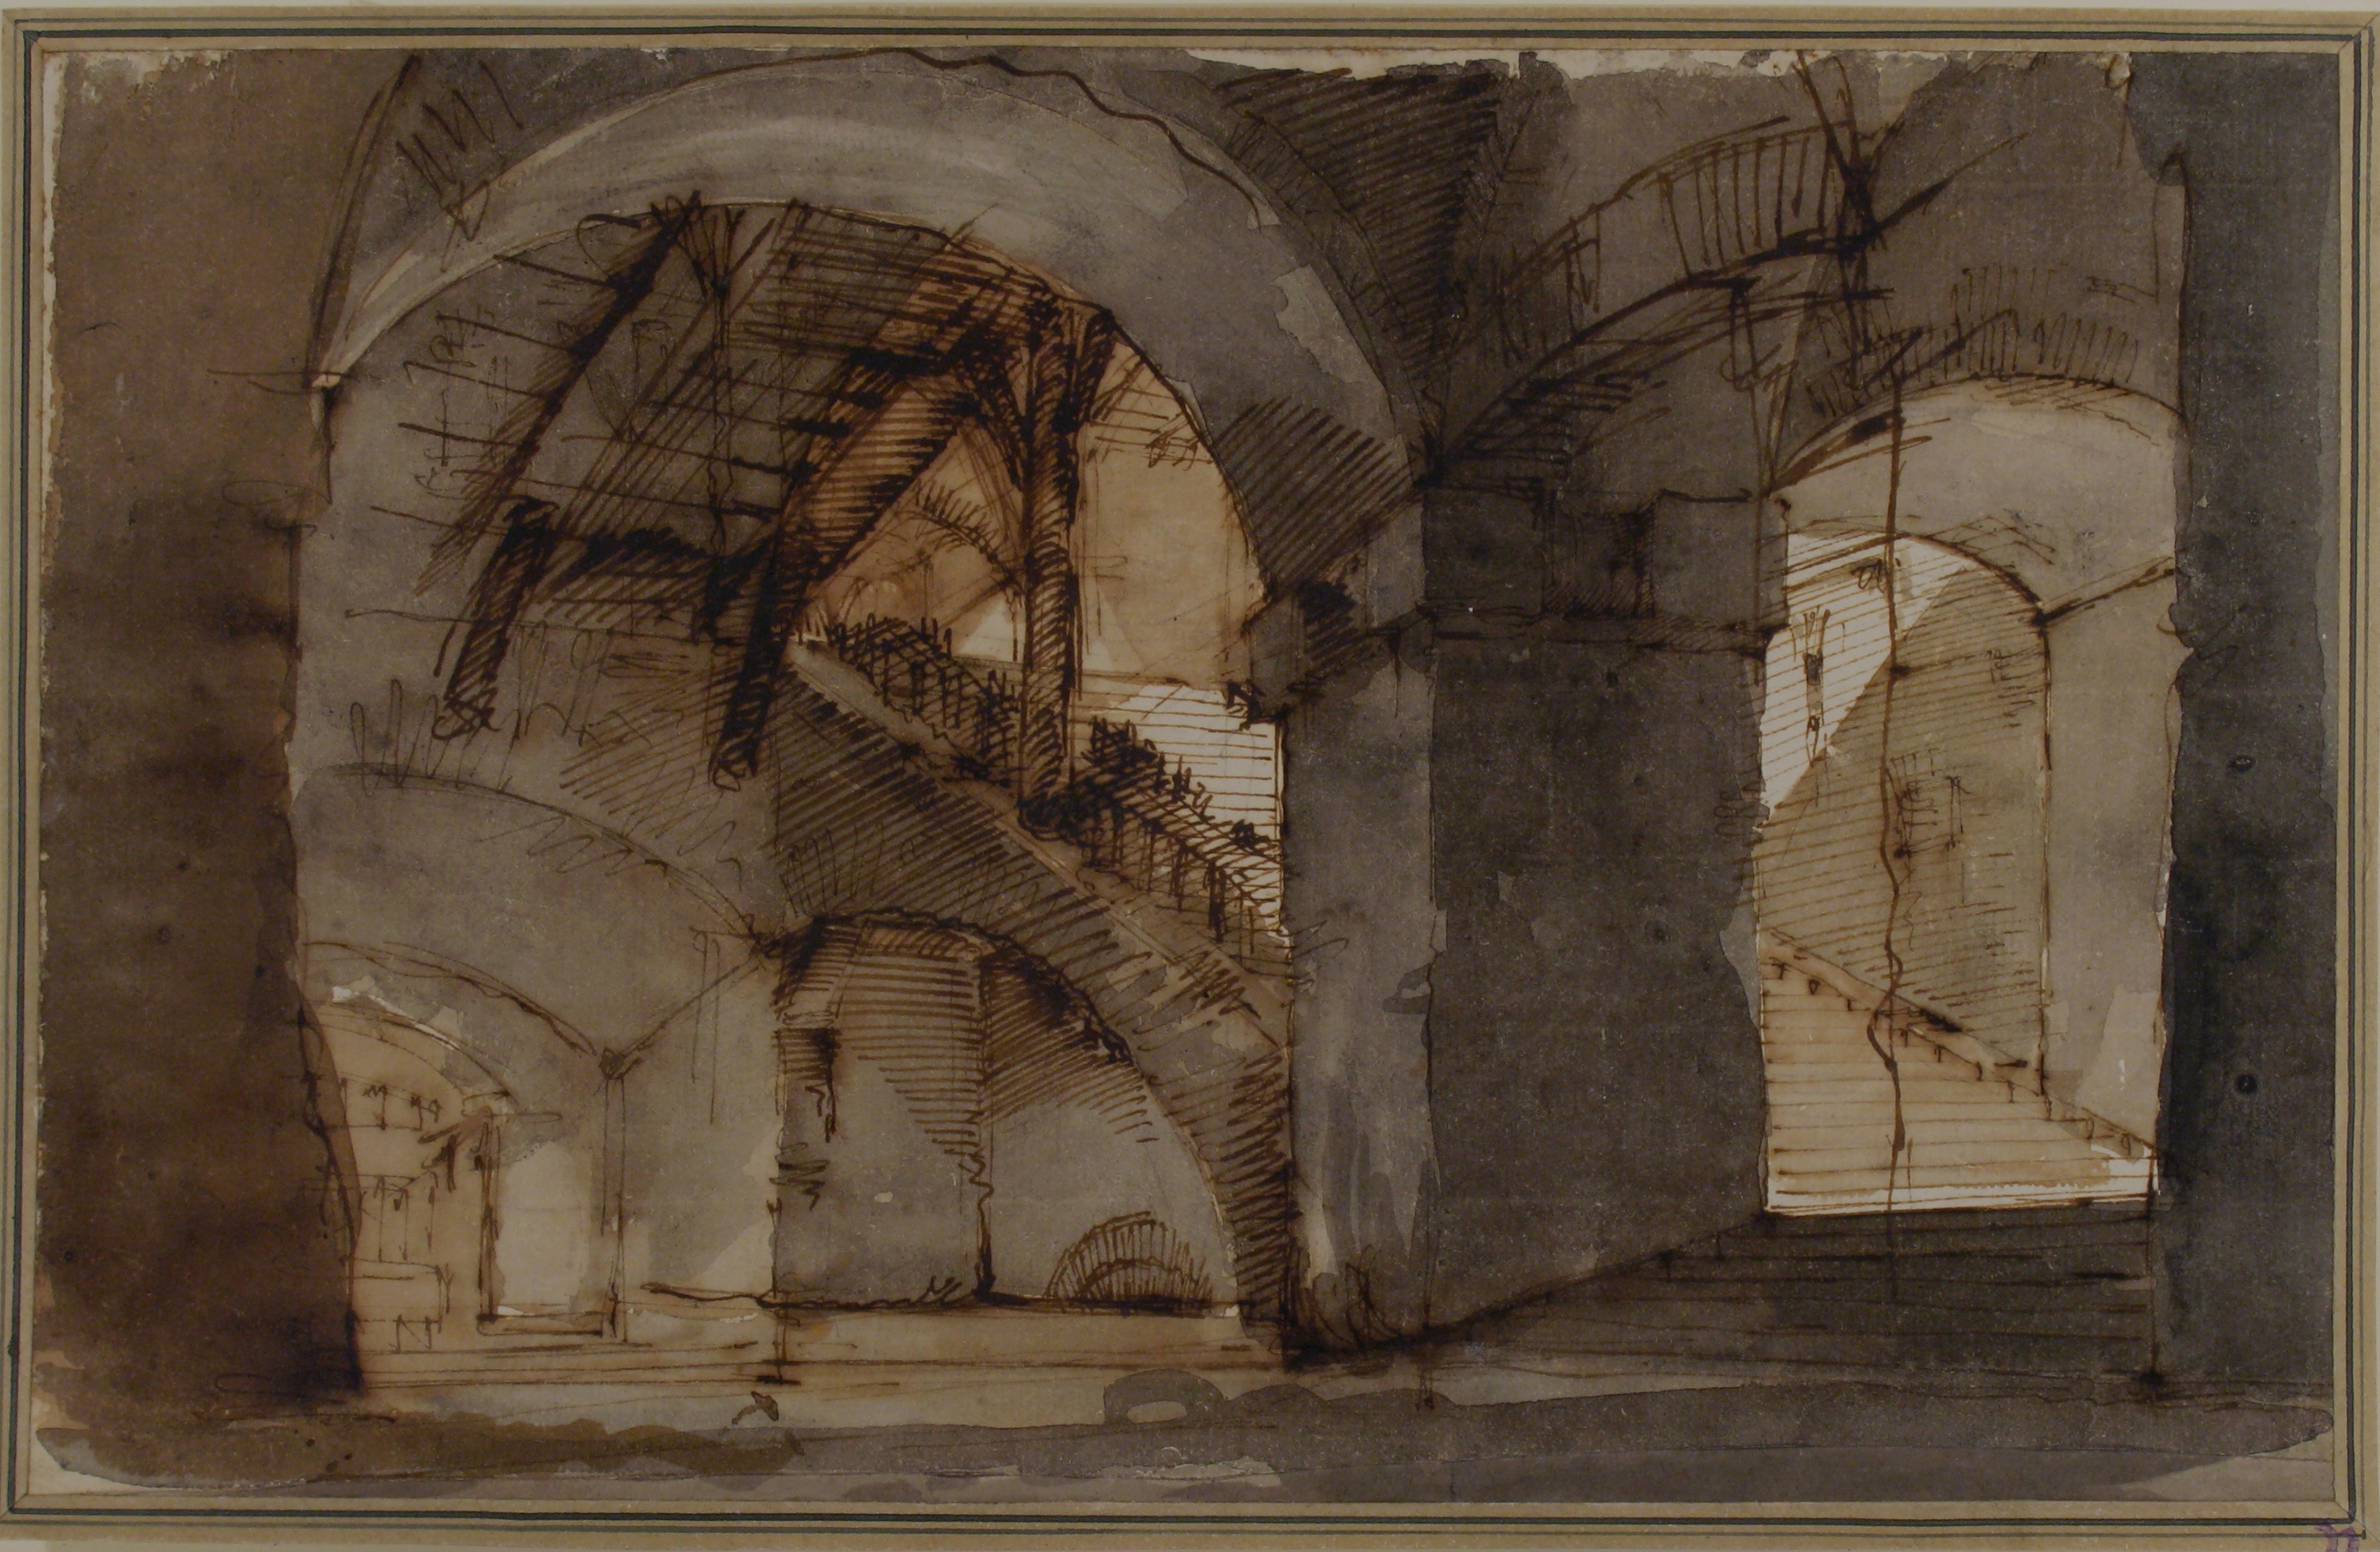 Domenica Fossati - Design for a Stage Set (Dungeon with High Vaults and a Staircase Right)